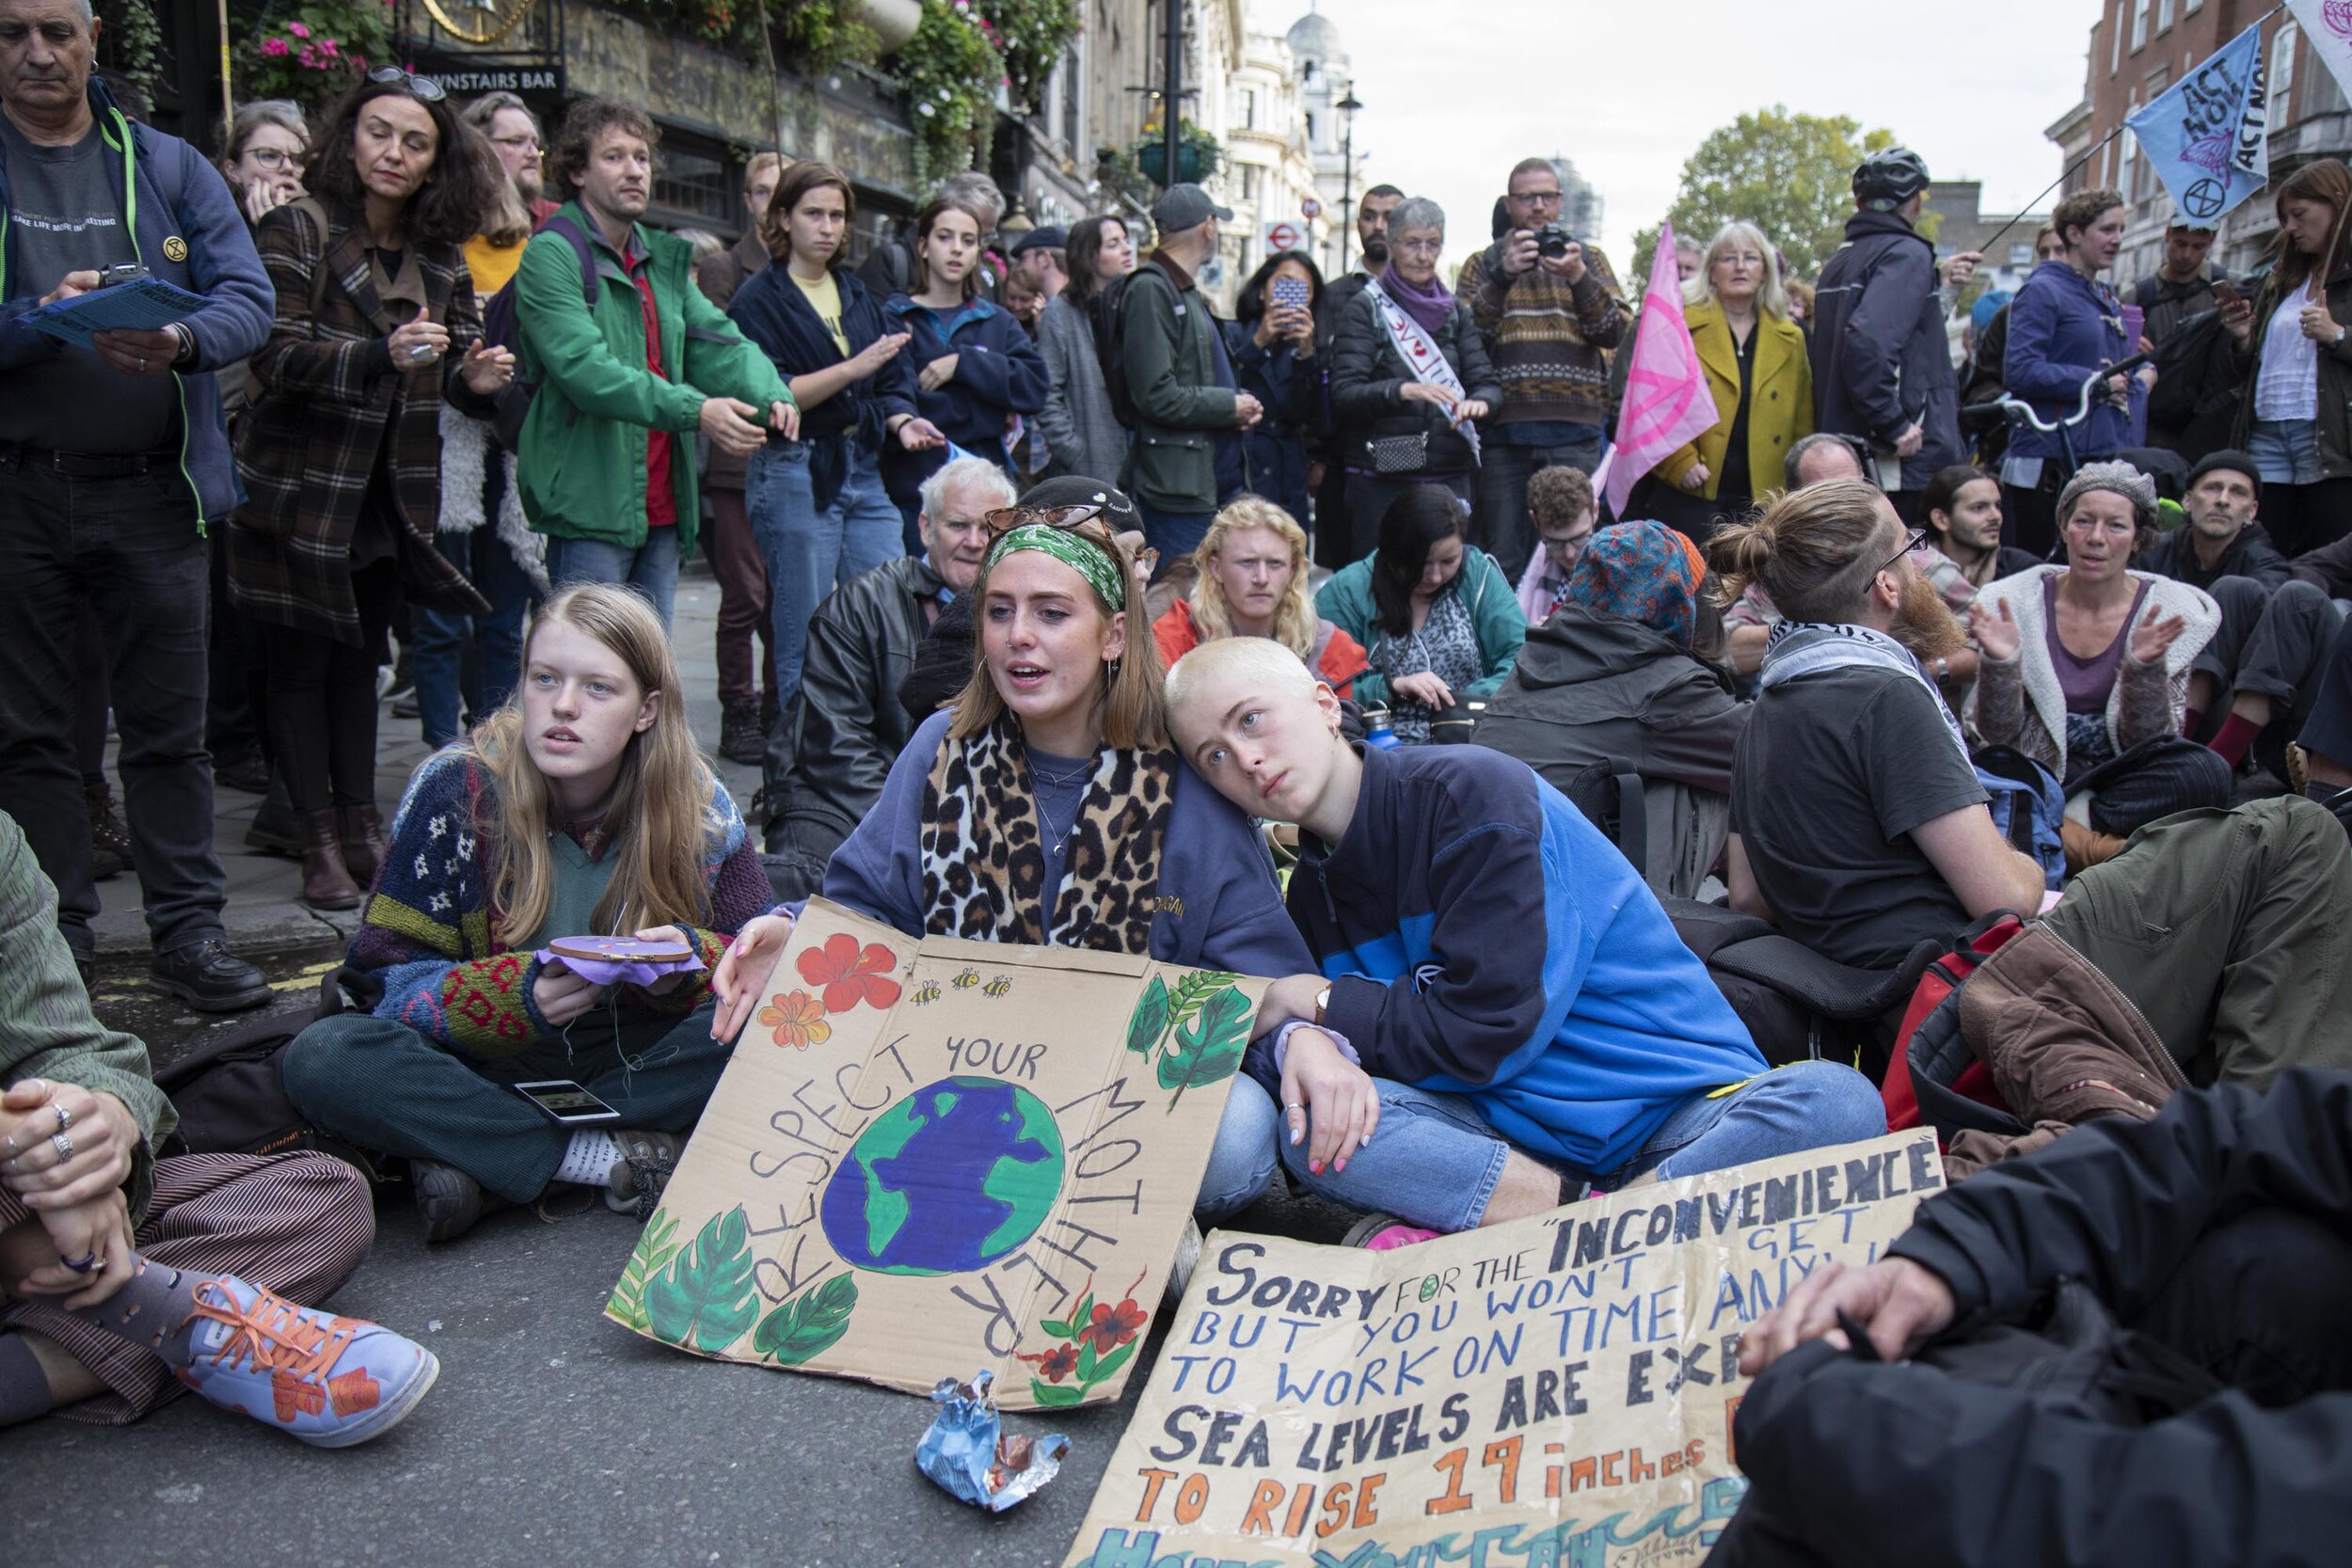  Despite a directive from the police not to gather, Extinction Rebellion take over Whitehall in a sit down protest where large numbers were arrested. 